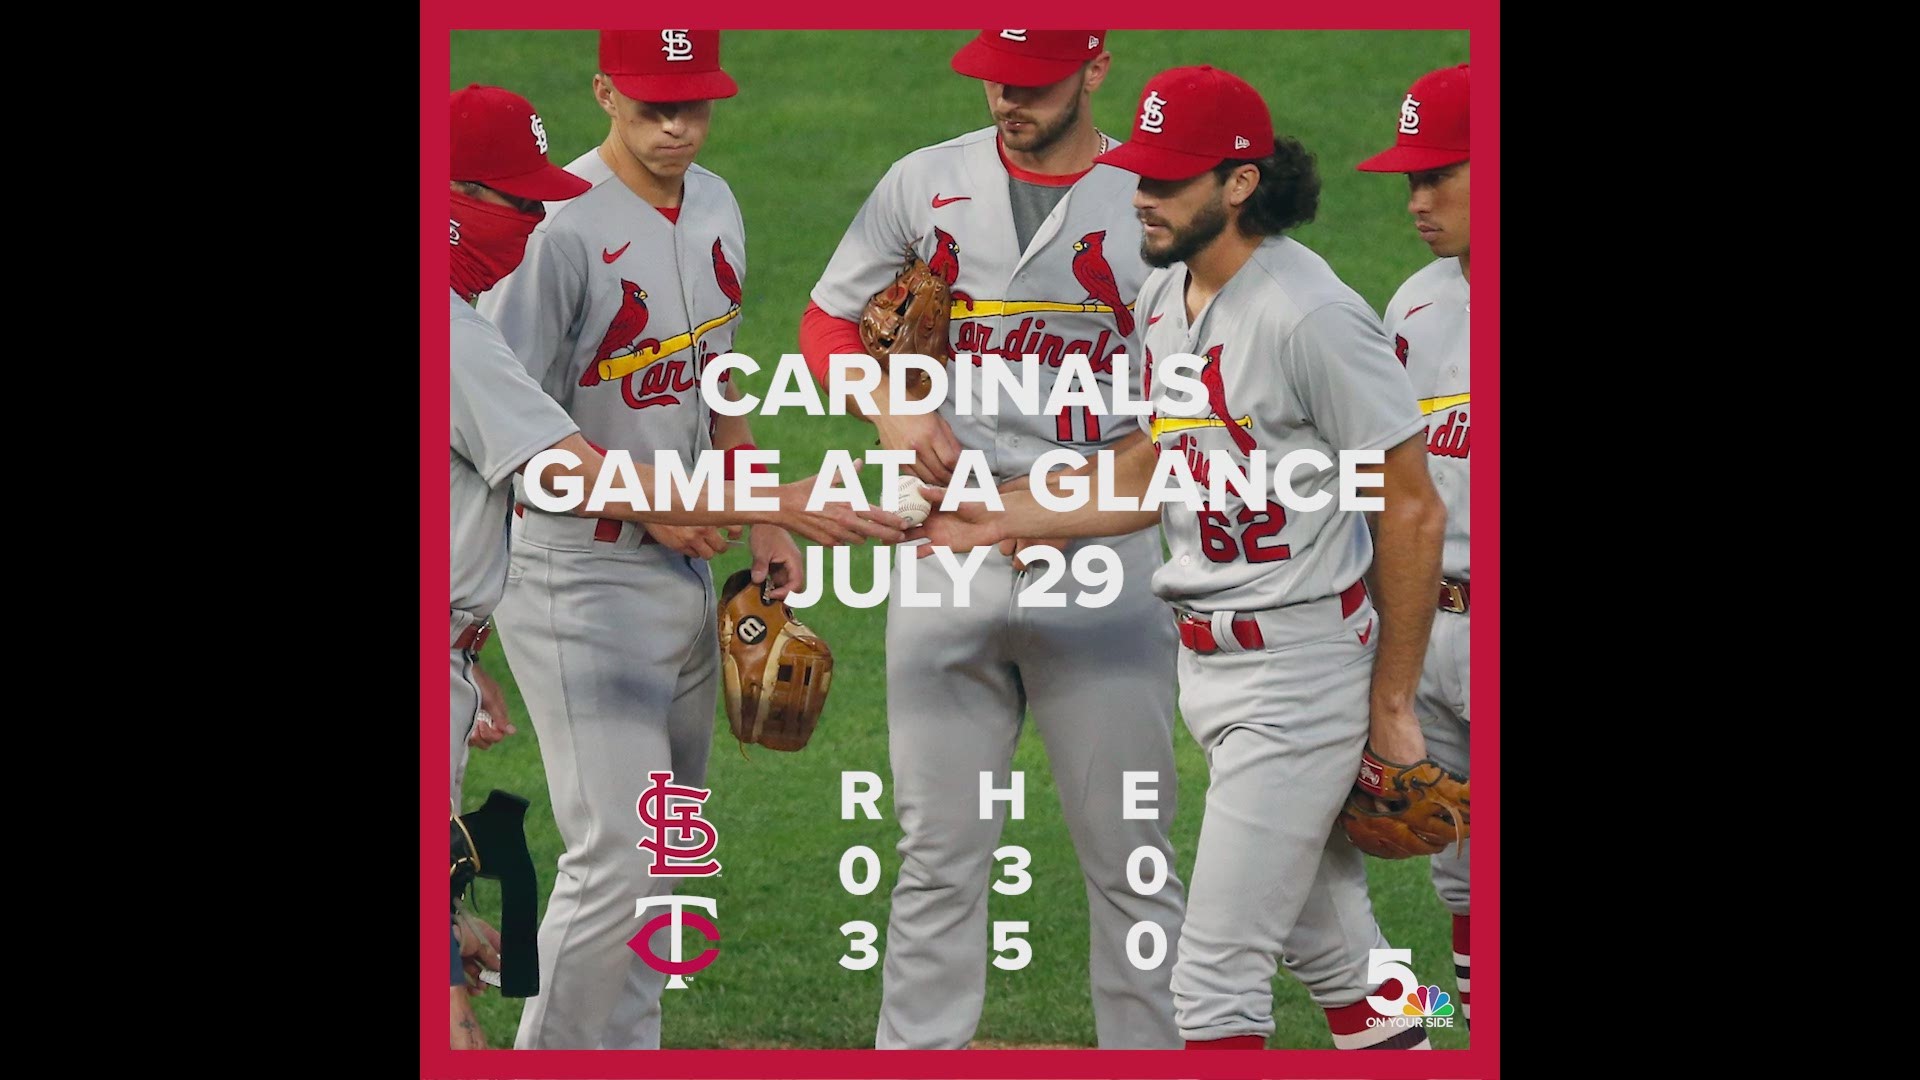 The Cardinals are now 2-3 on the season